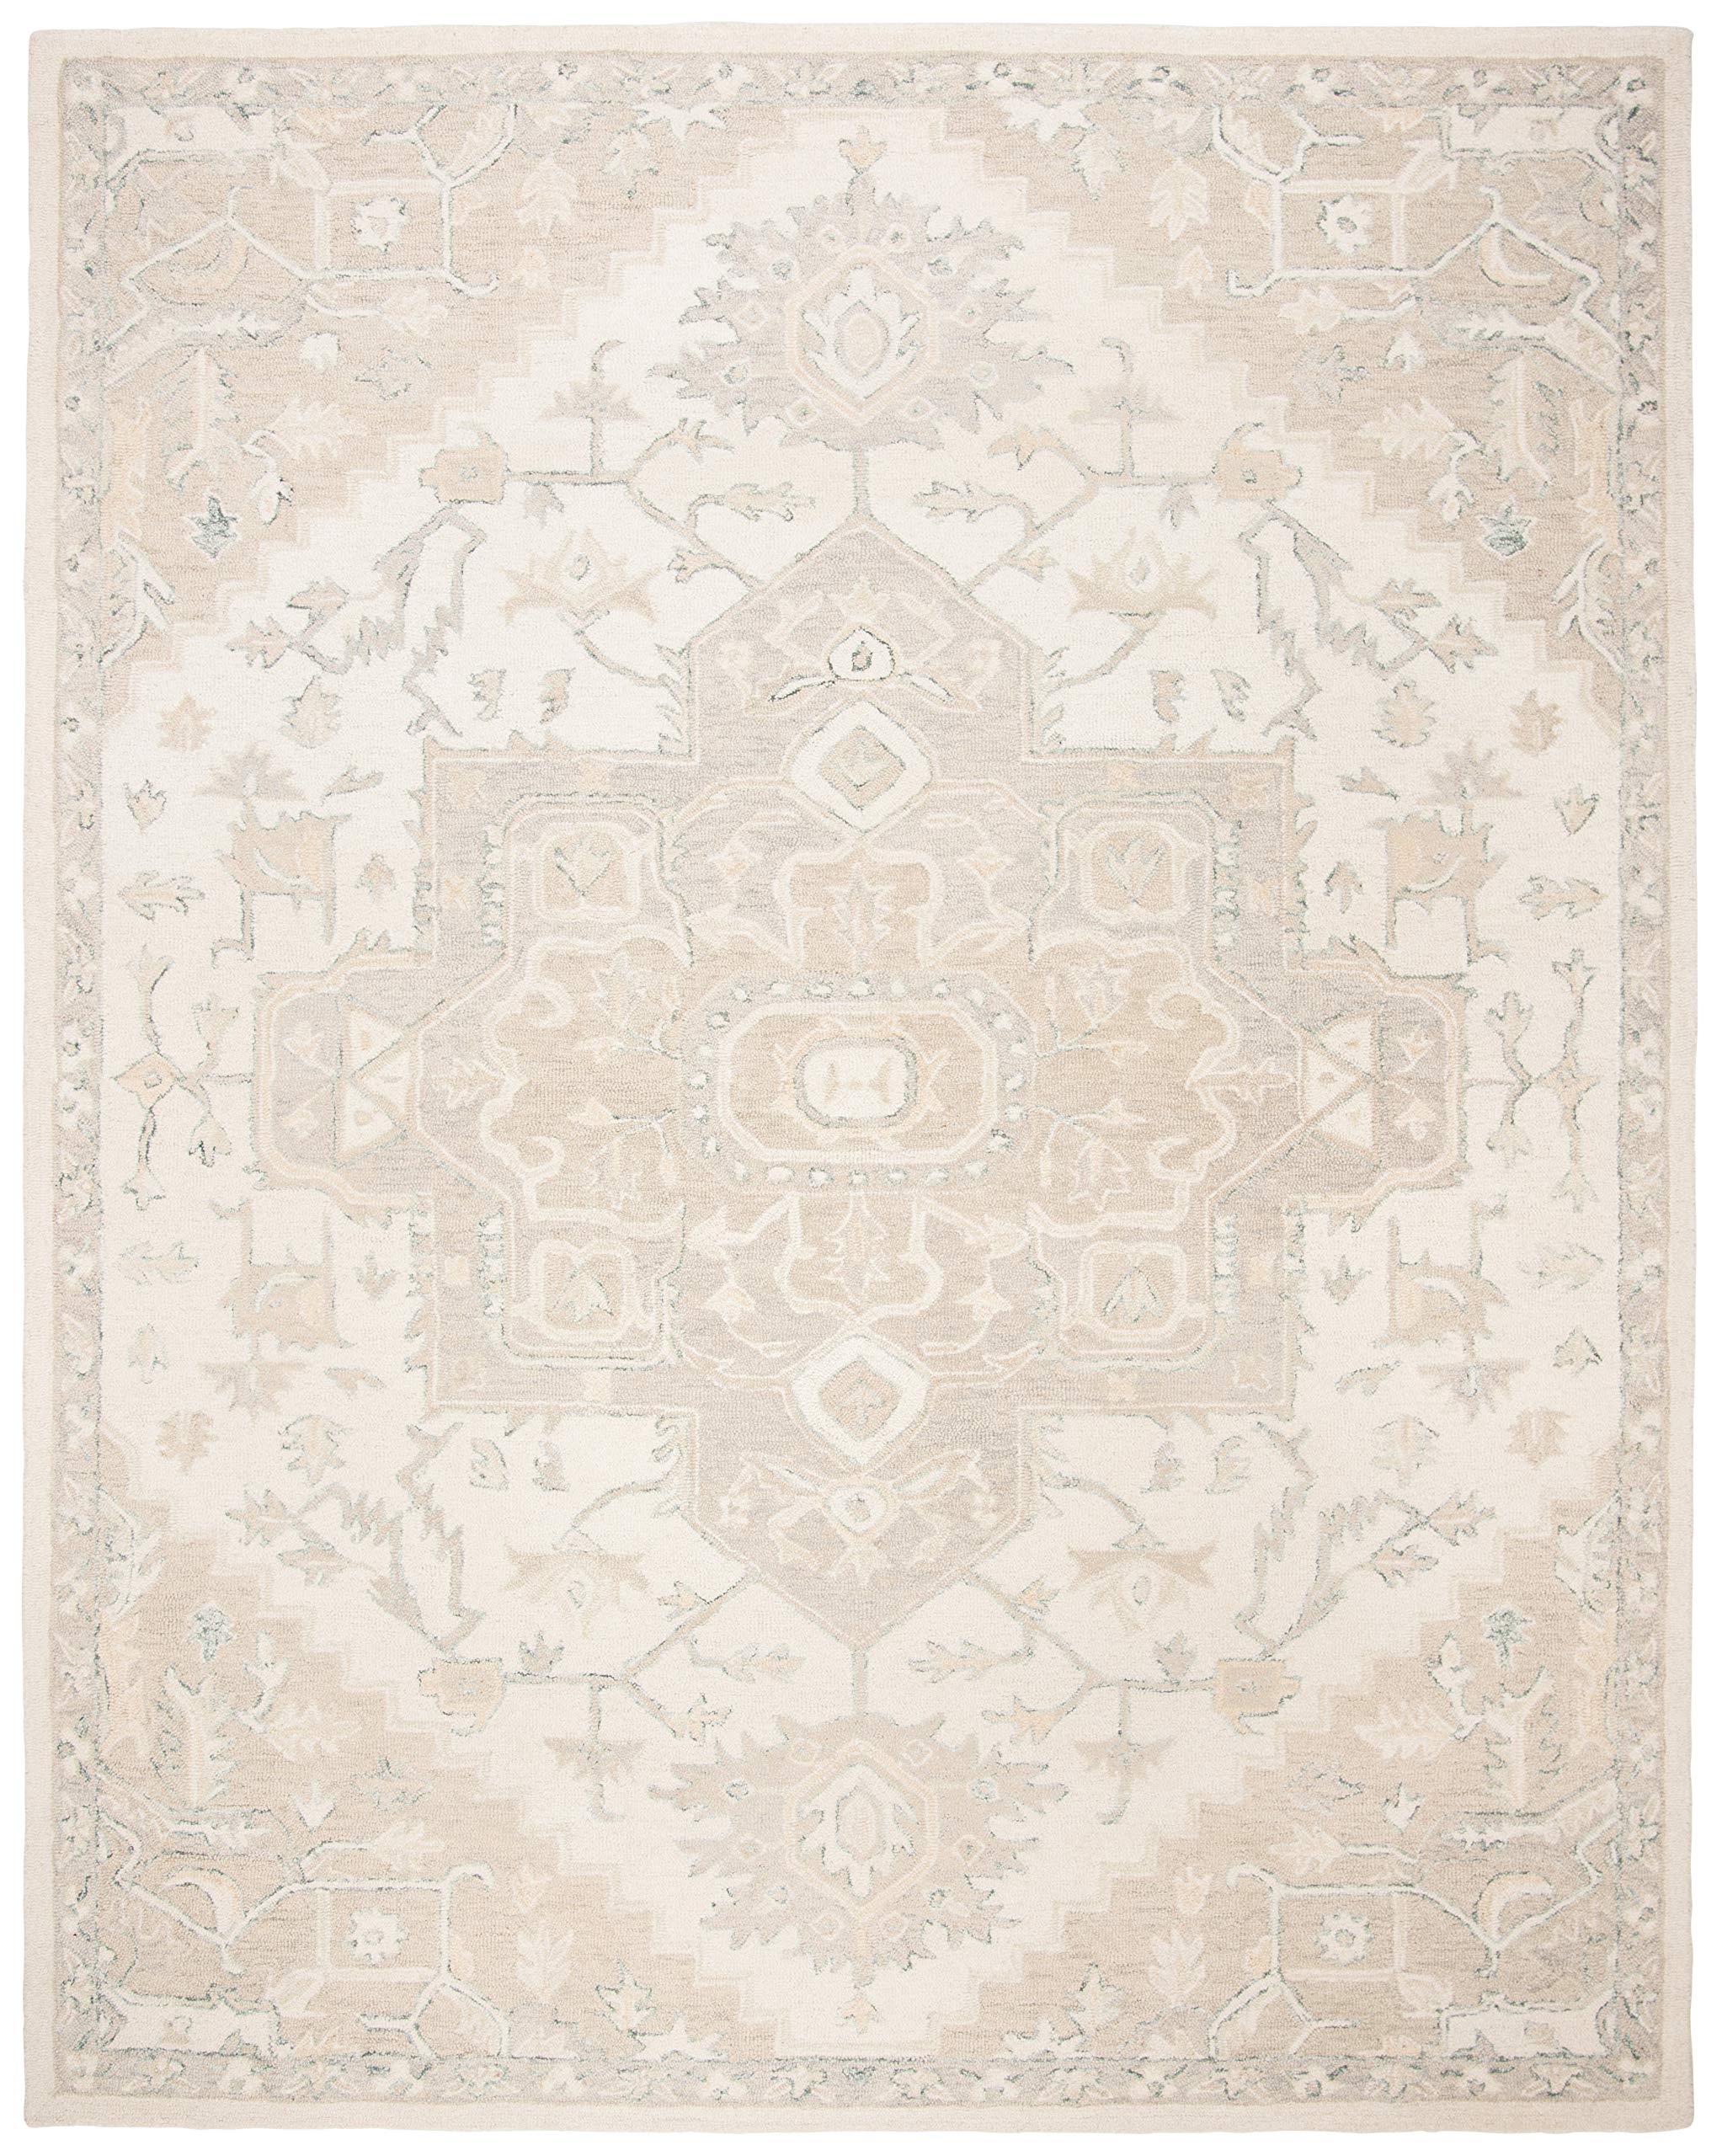 SAFAVIEH Micro-Loop Collection Area Rug - 9' x 12', Ivory & Beige, Handmade Shabby Chic Medallion Wool, Ideal for High Traffic Areas in Living Room, Bedroom (MLP503B)